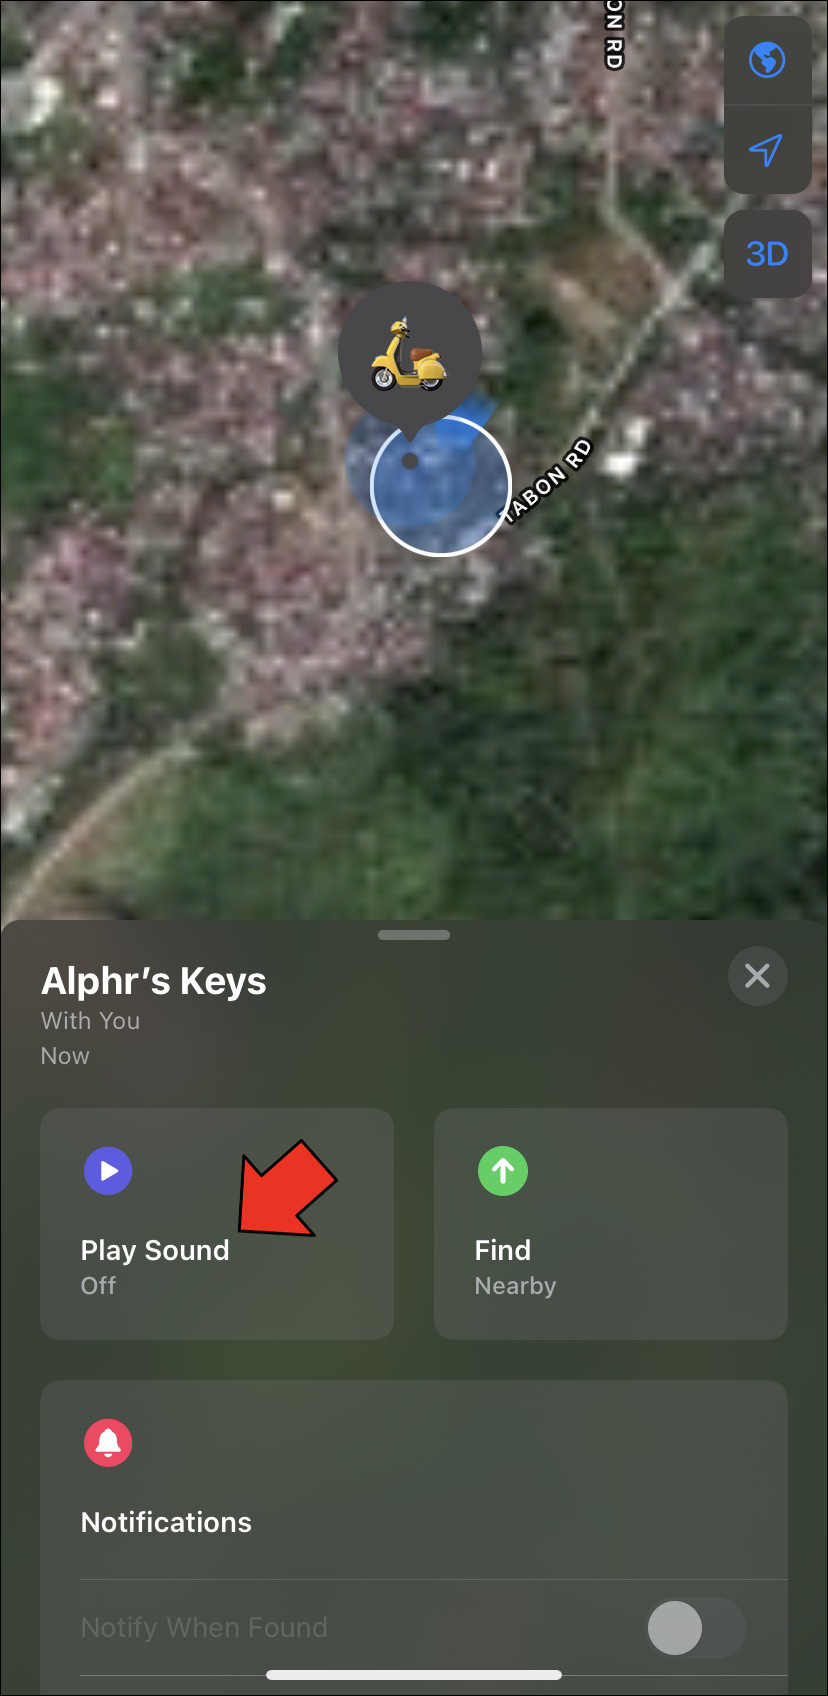 Want to Share AirTag Location with Others? You Can't and Learn Why - EaseUS